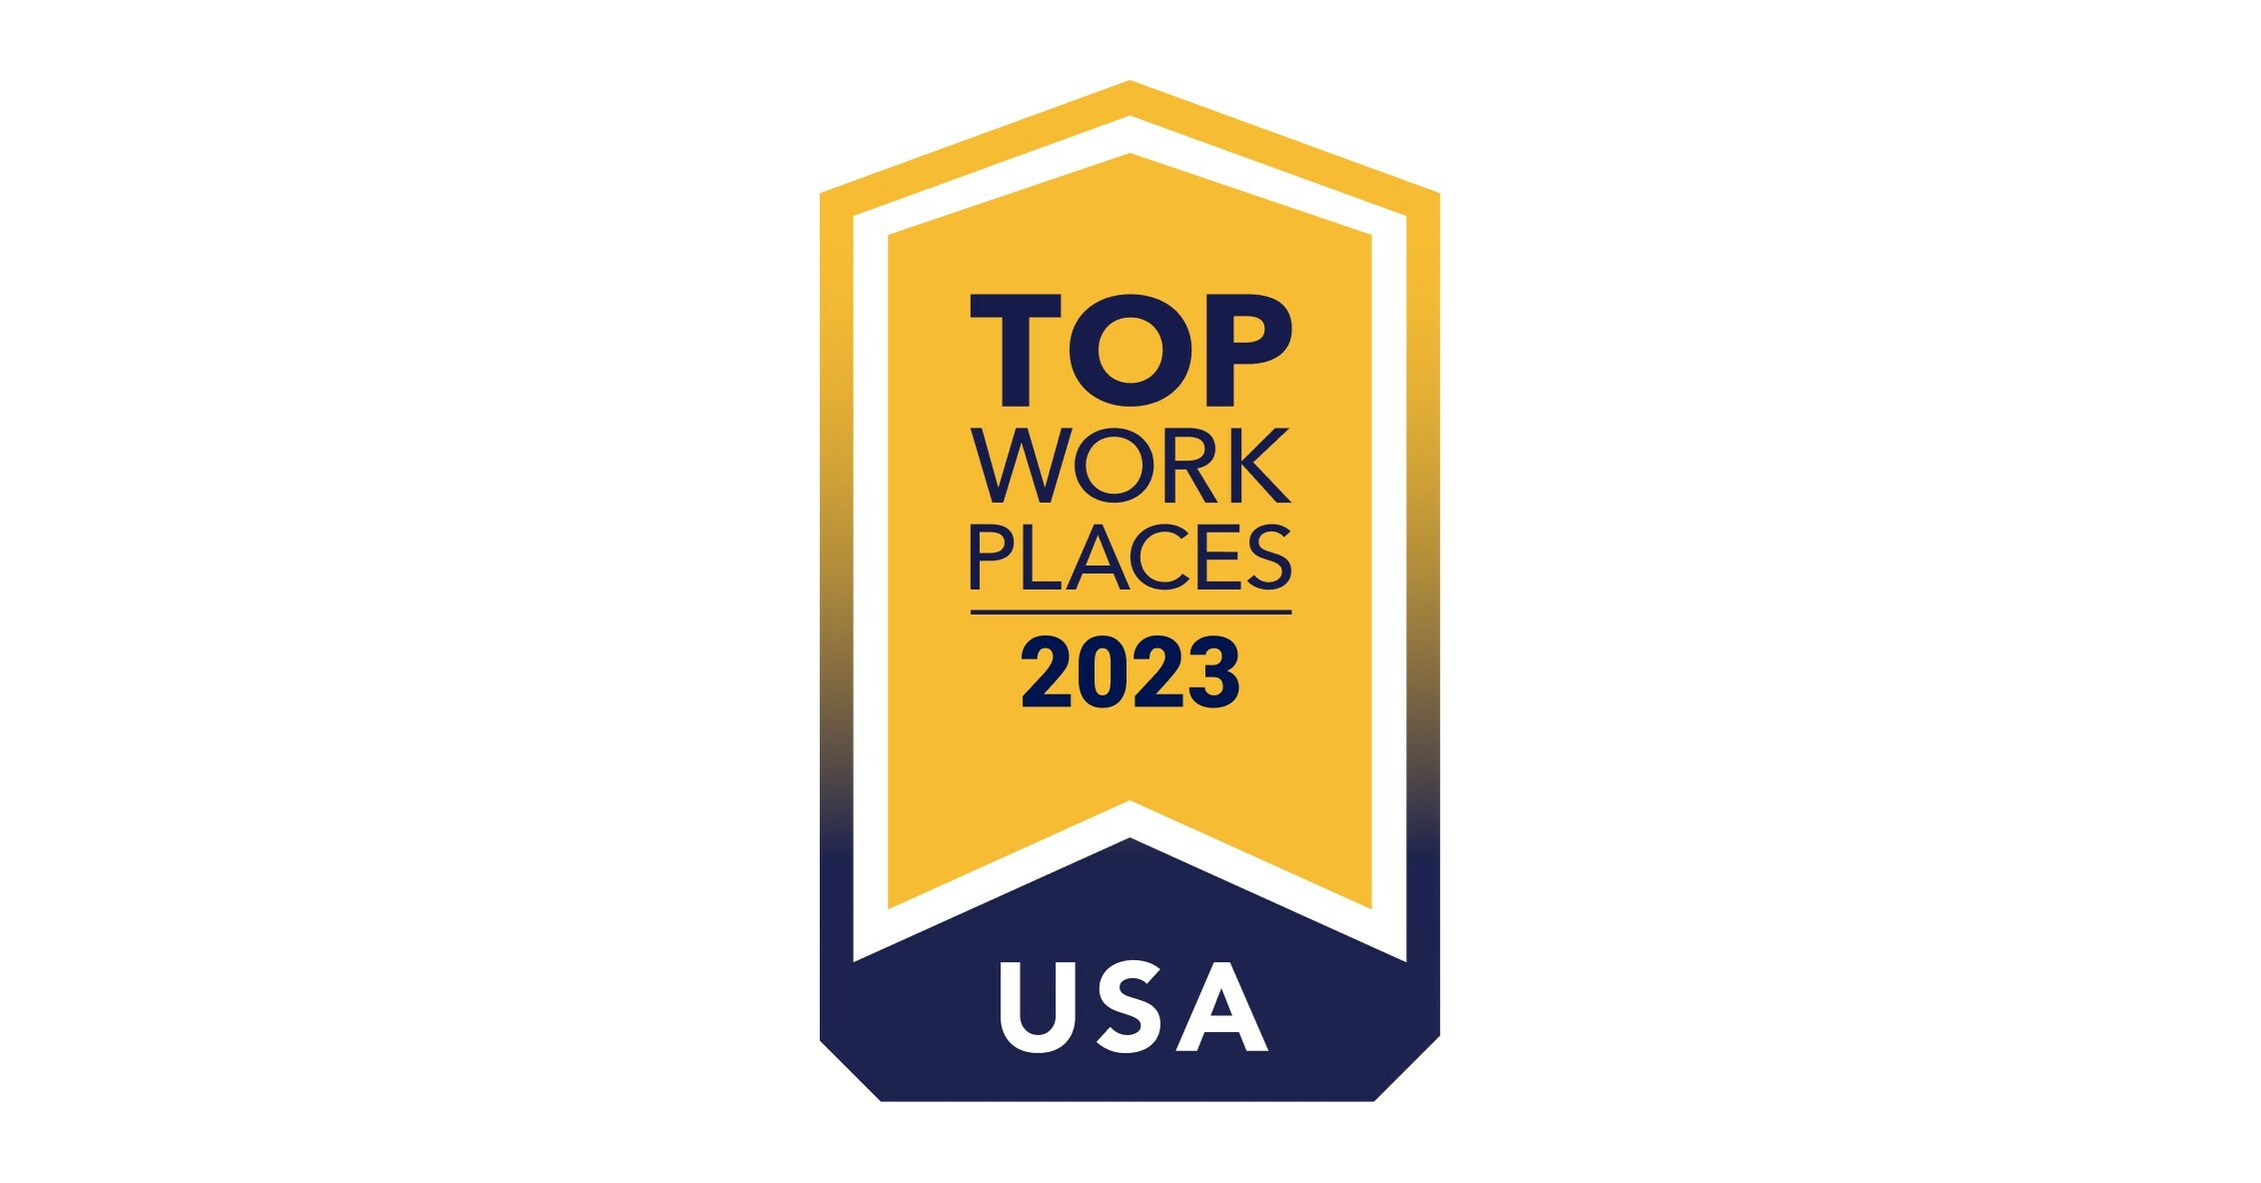 Grey Named Most Loved Workplace for 2023, Grey